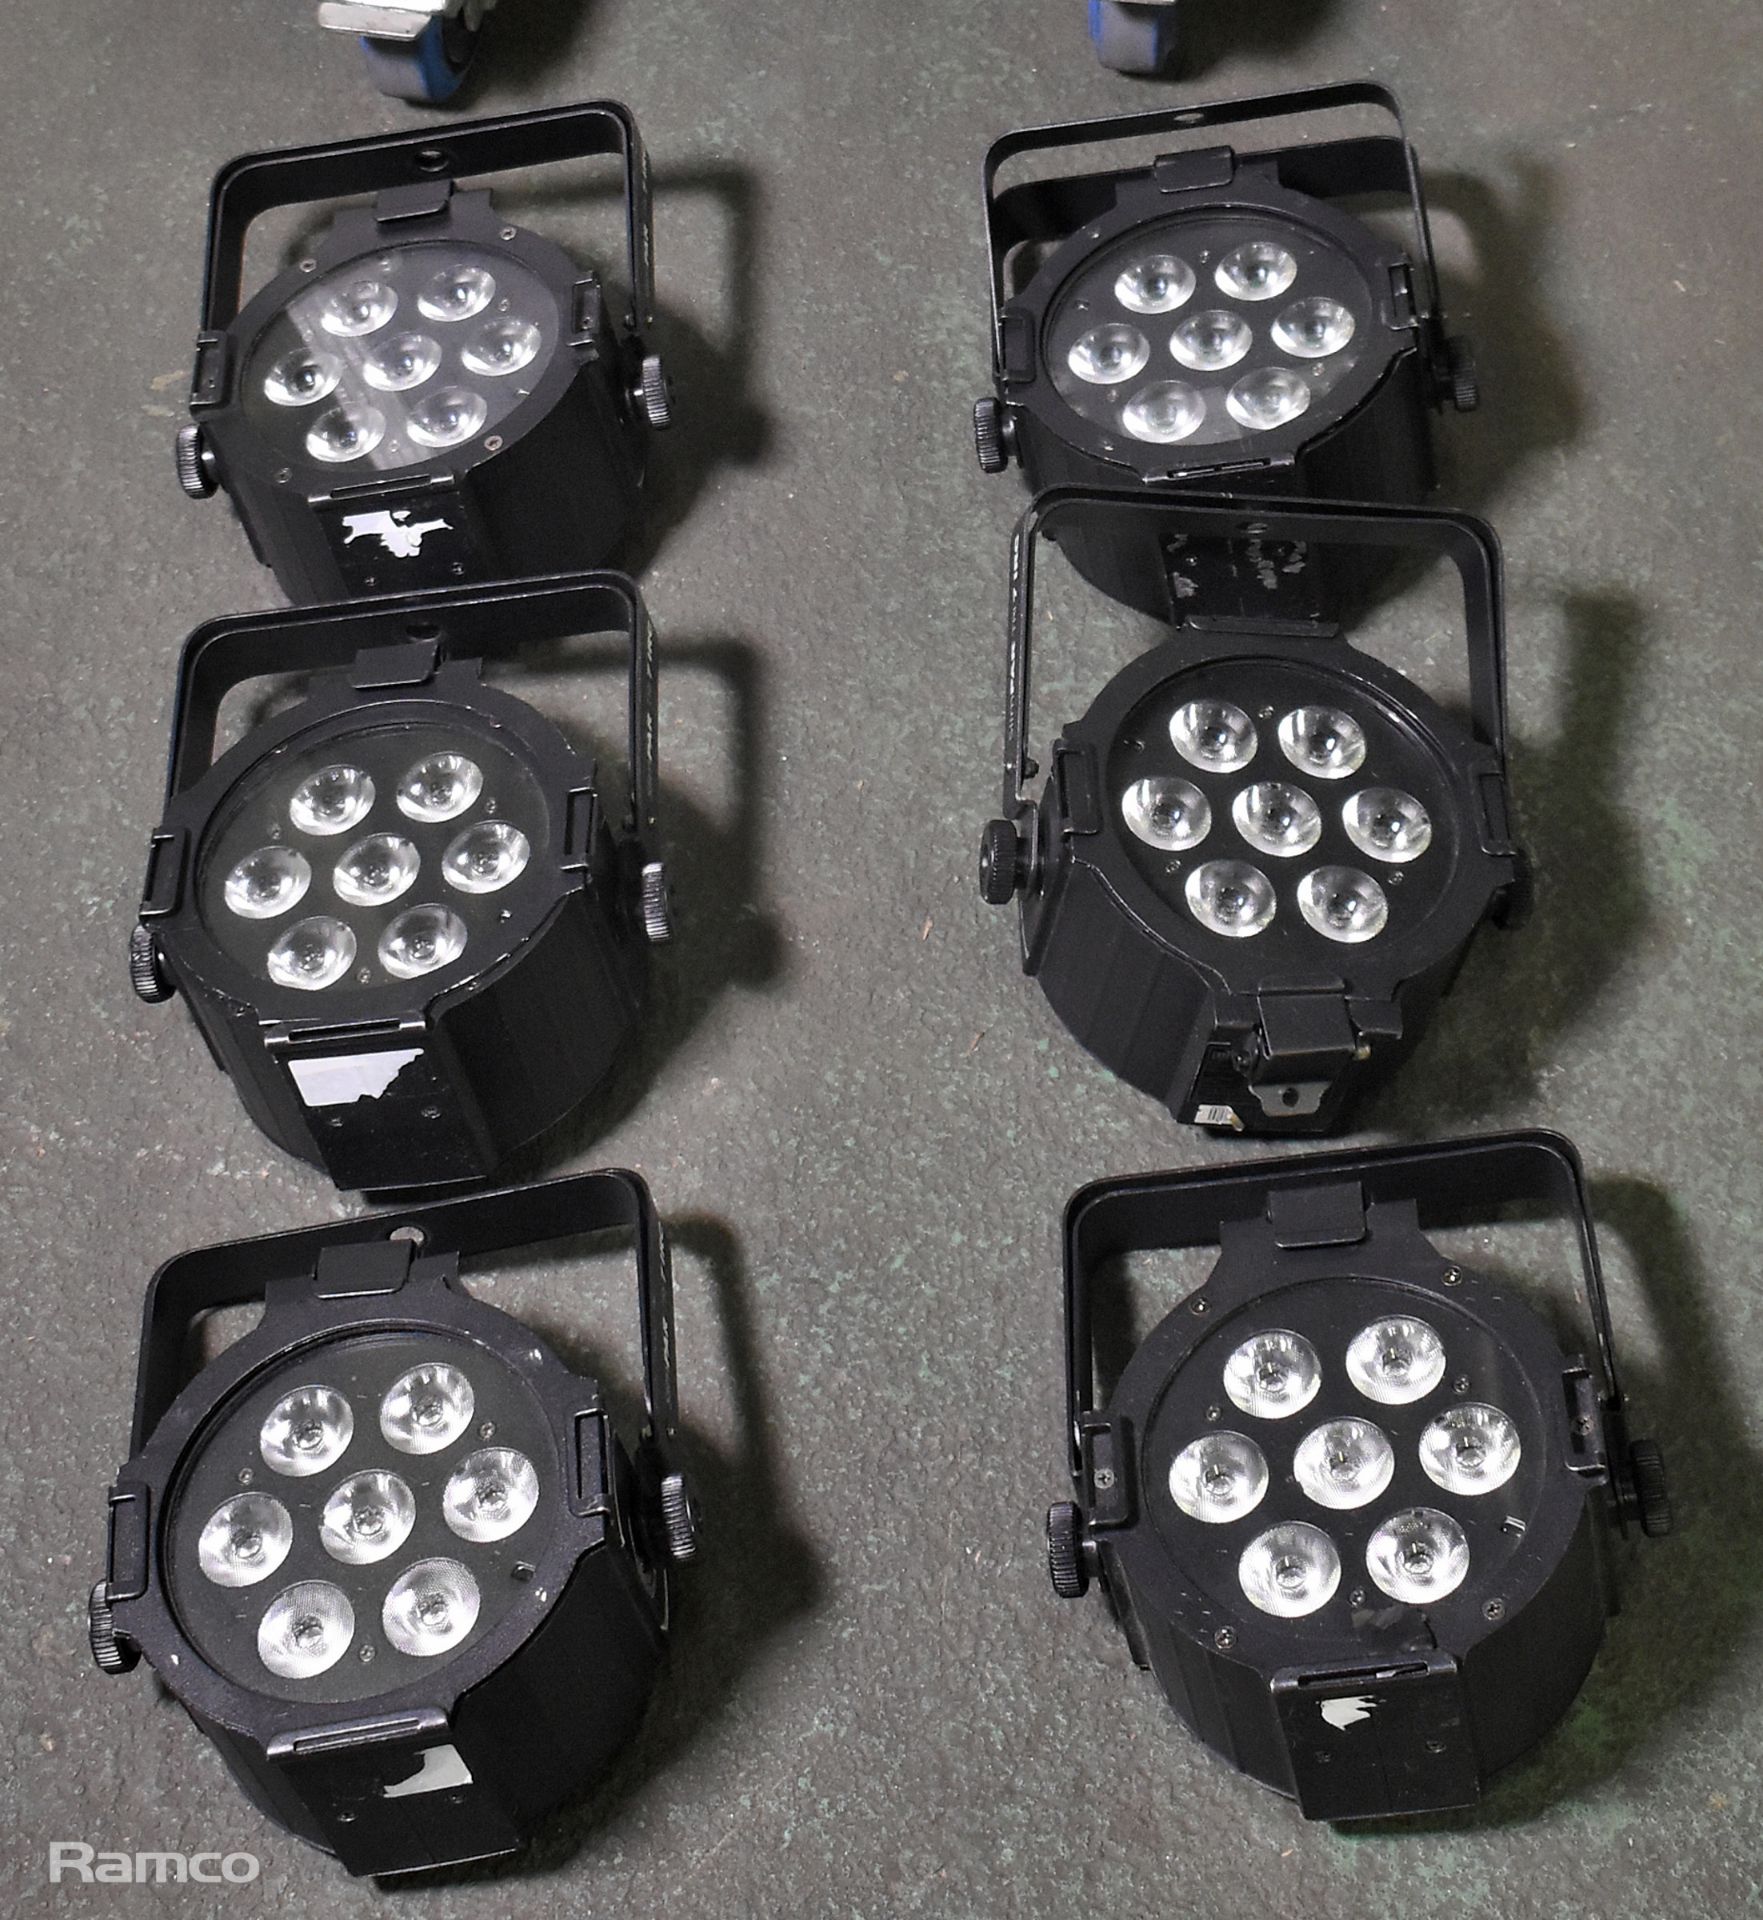 6x Chauvet LED SlimPar Tri7 IRC in flight case with power cables - Image 4 of 11